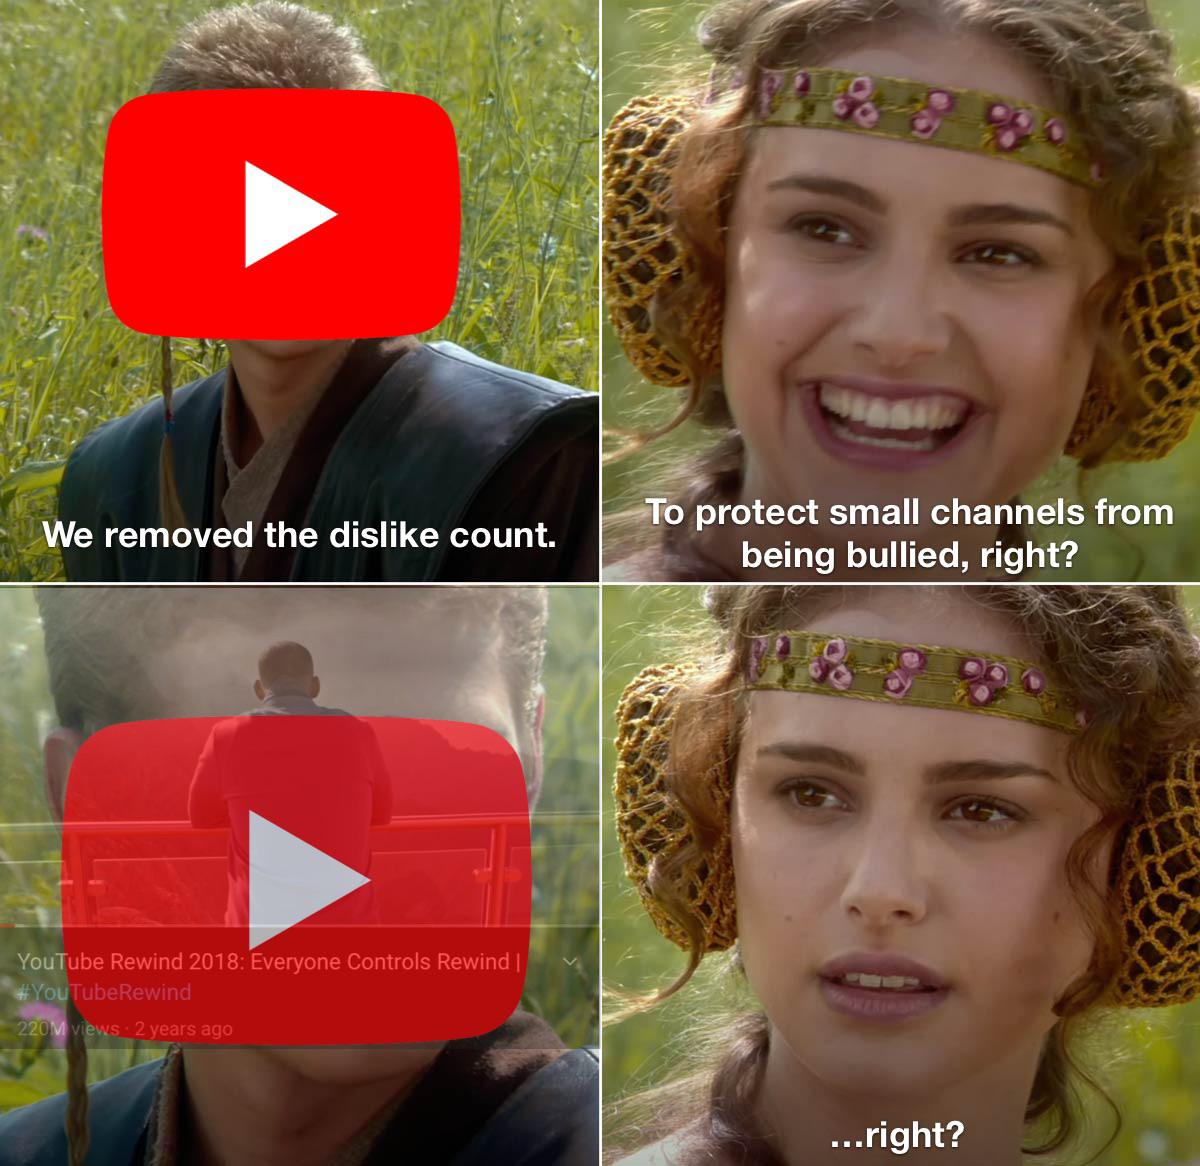 padme amidala - We removed the dis count. To protect small channels from being bullied, right? YouTube Rewind 2018 Everyone Controls Rewind | YouTube Rewind 220M views 2 years ago ...right?